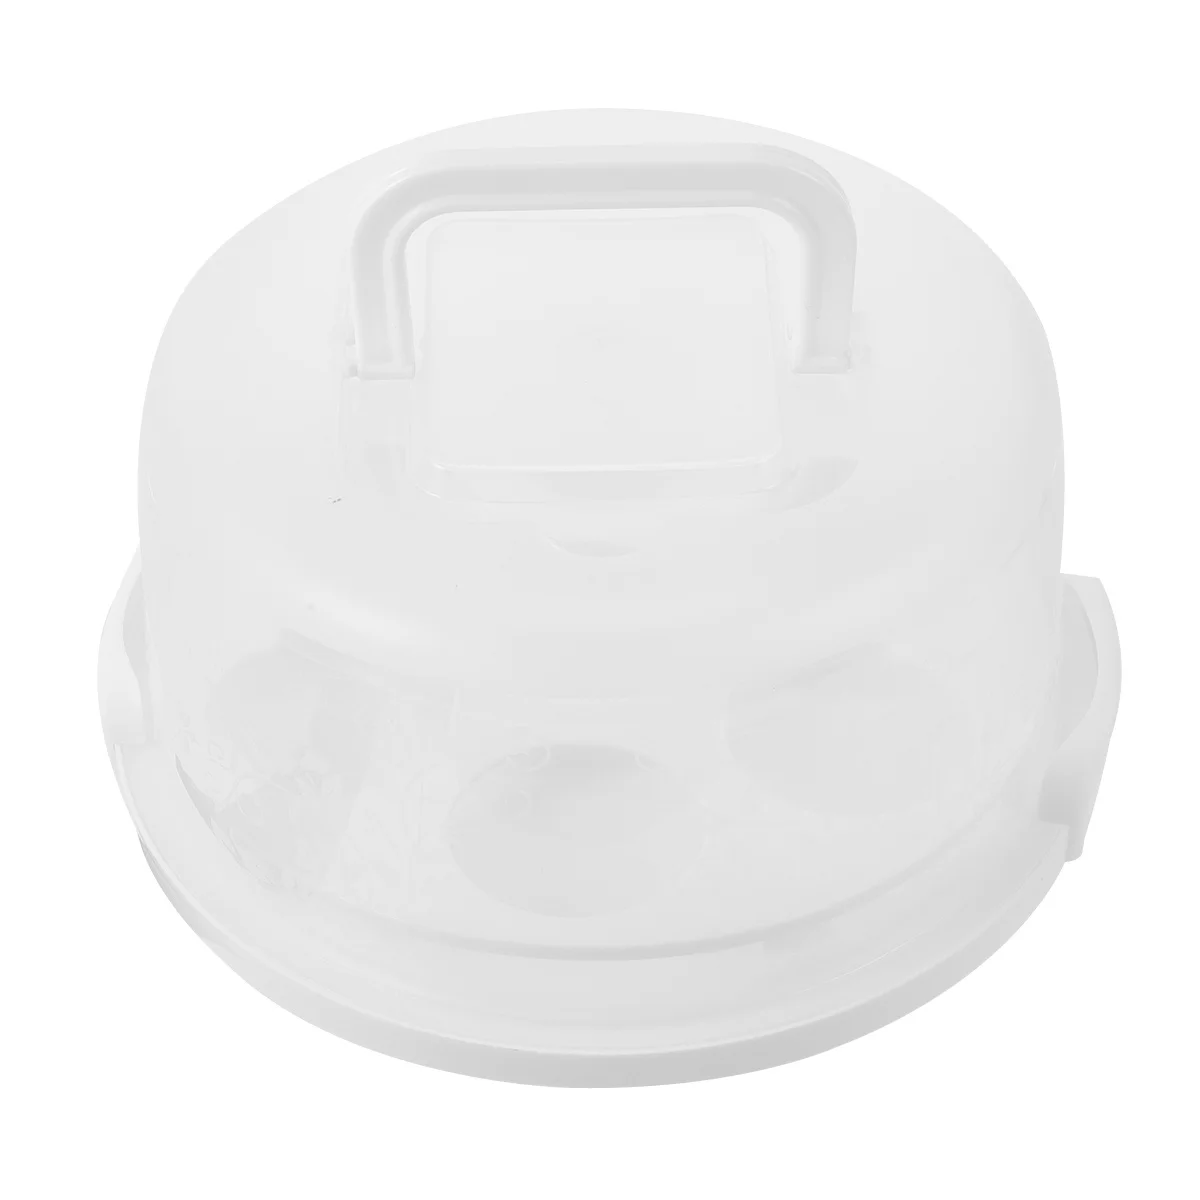 

Cake Carrier Clear Cake Container Cake Box Storage Case with Handle Dome Lids White